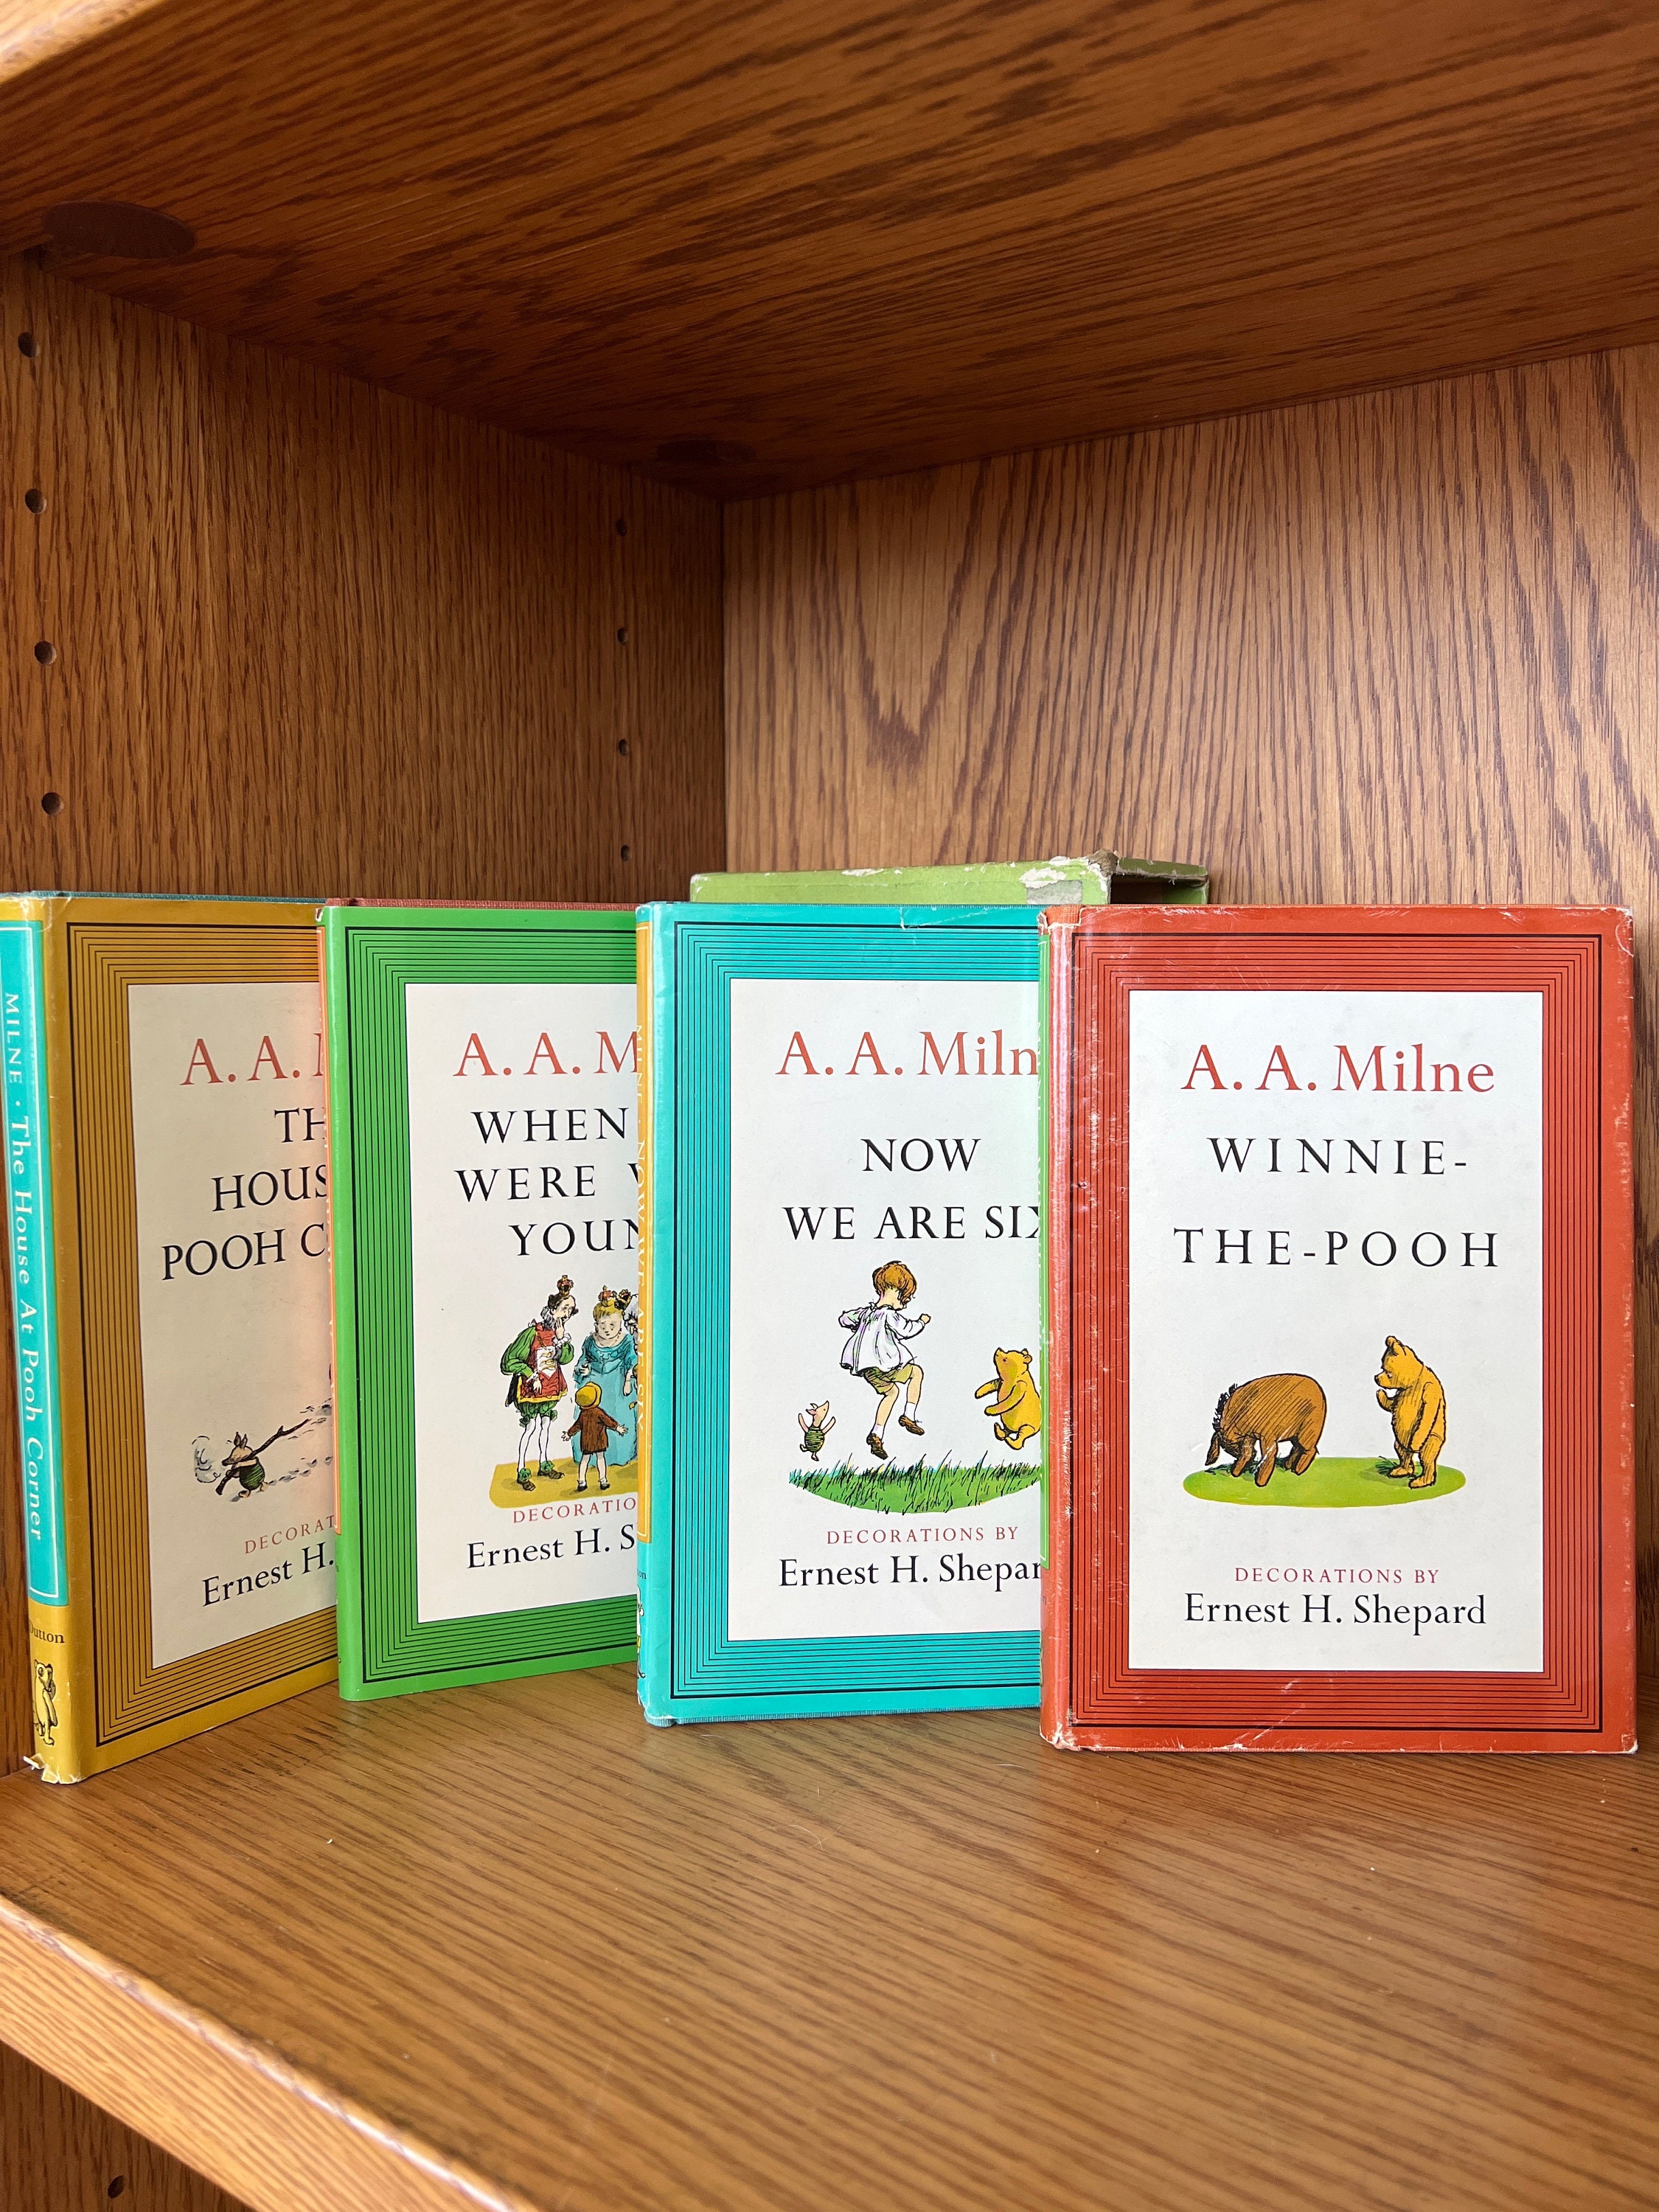 The Complete Tales of Winnie-the-Pooh (Barnes & Noble Collectible Editions)  by A. A. Milne, Ernest H. Shepard, Hardcover